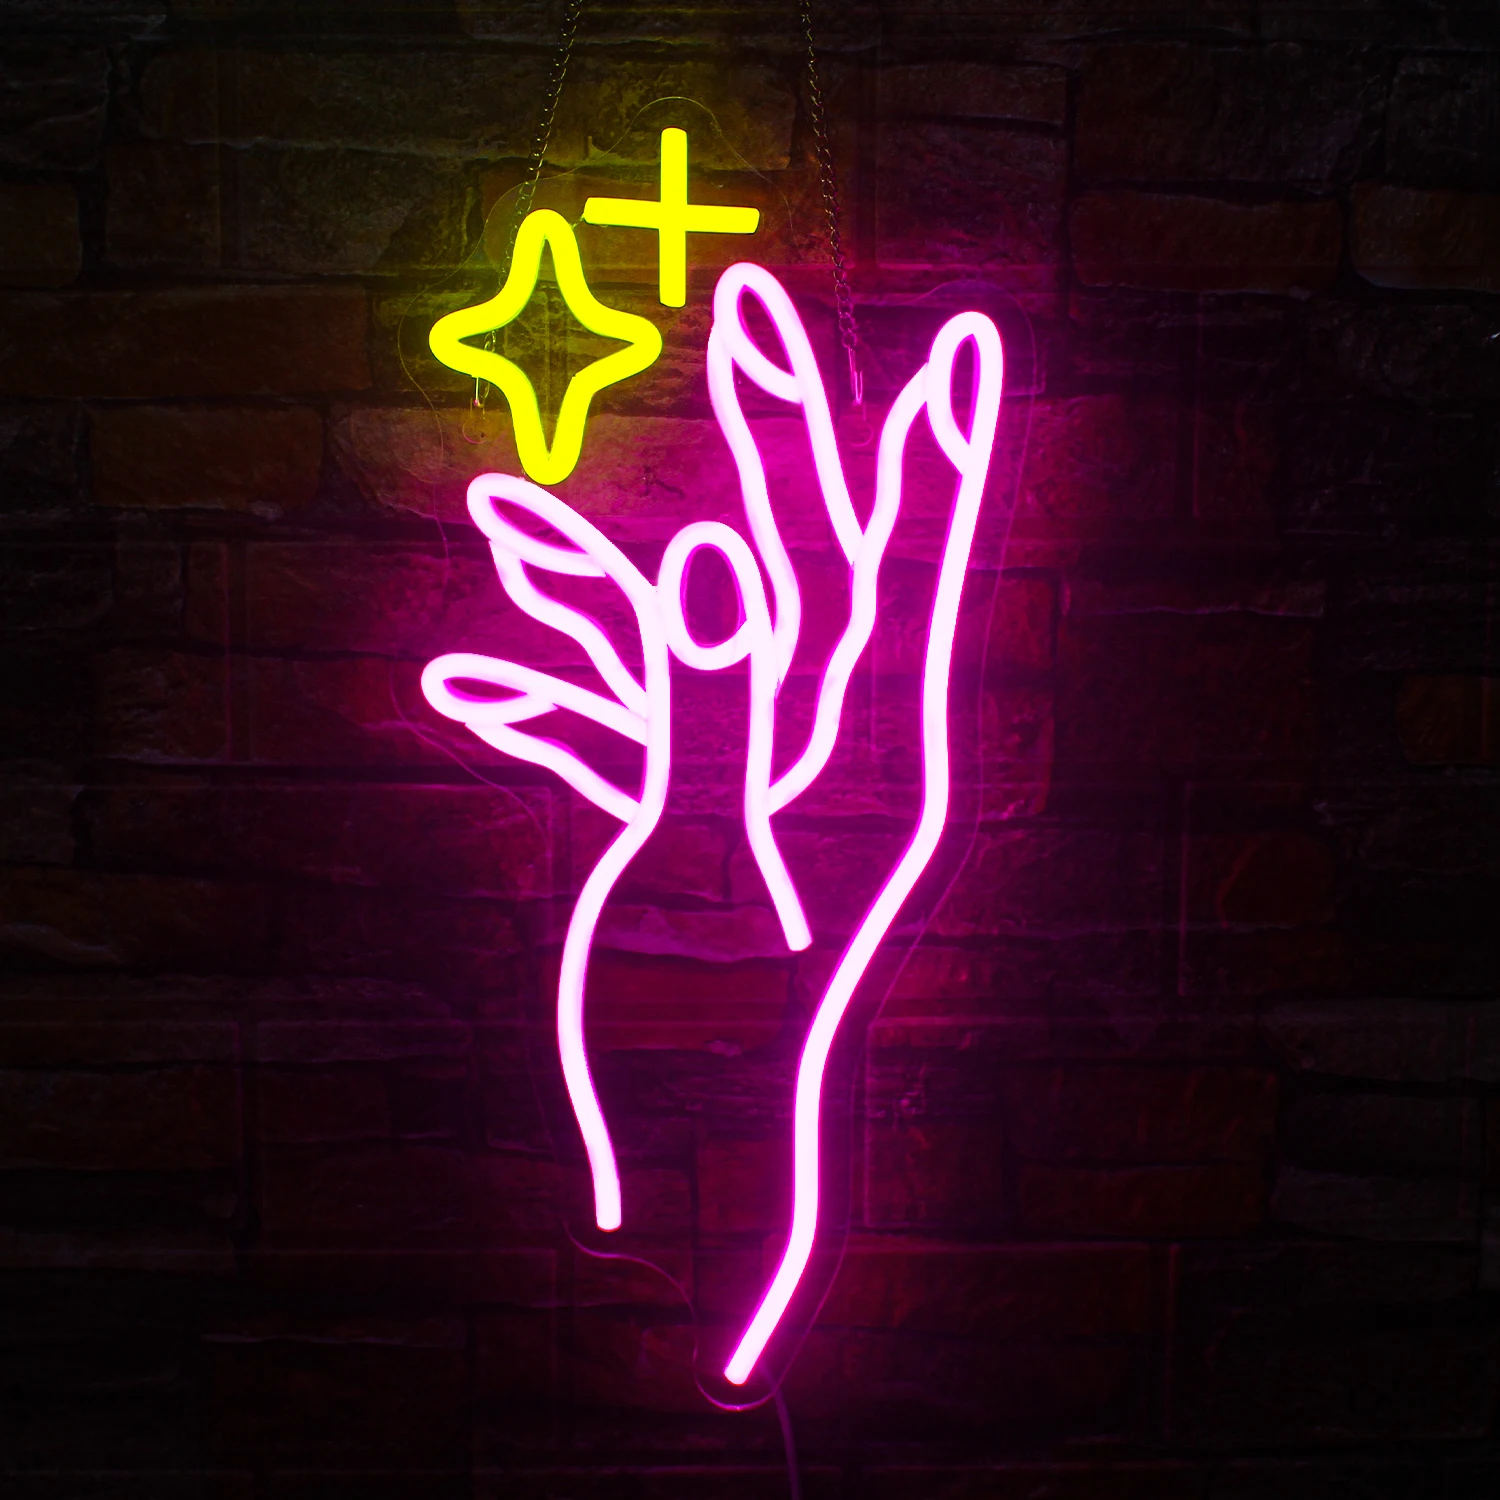 Yellow Star Hand Neon Sign Pink Nail Led Signs Wall Decor for Bedroom Girls Room Nail Salon Beauty Room Decoration Led Neon open 24hrs neon light led sign living gaming room cave shop bar club salon restaurant studio design personalized wall decoration